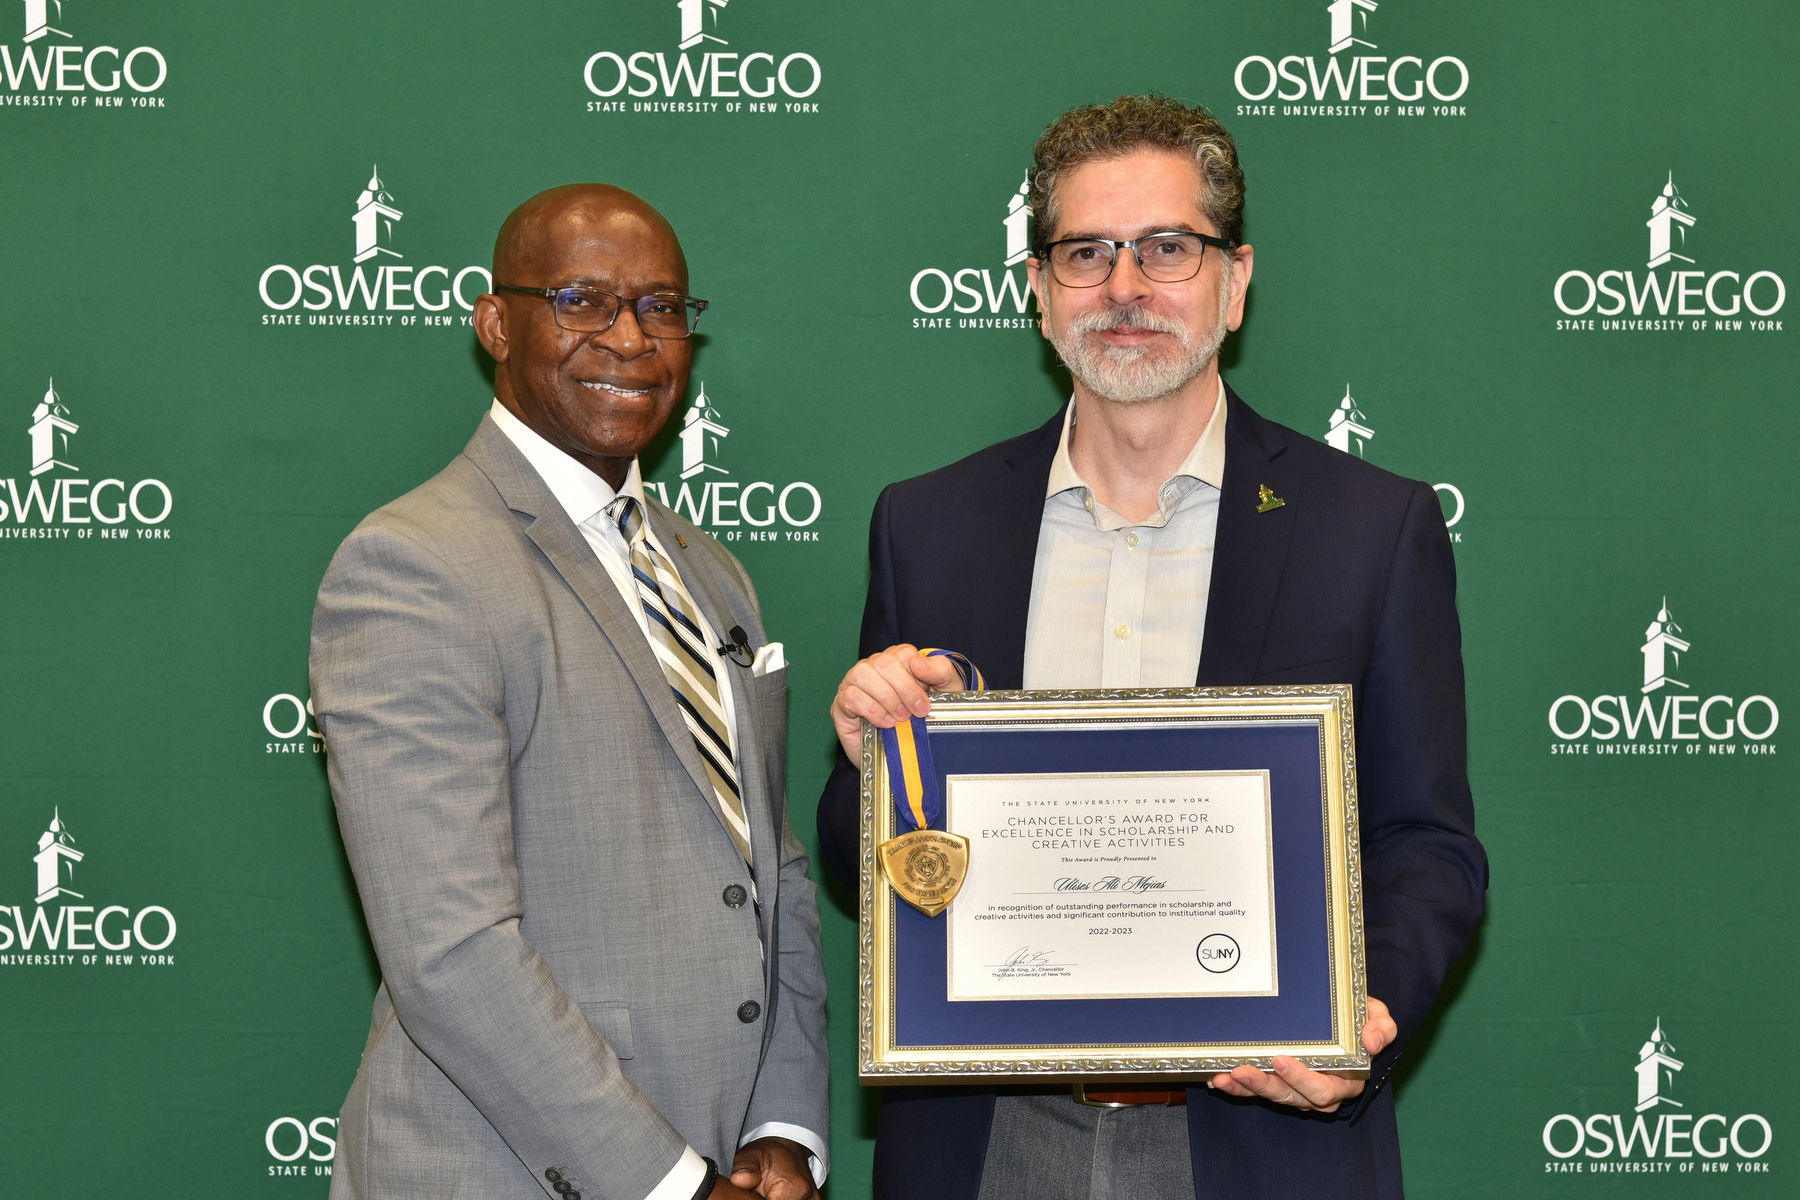 The SUNY Chancellor's Award for Excellence in Scholarship and Creative Activities was officially presented to Ulises Mejias by President Peter O. Nwosu during the Opening Breakfast.